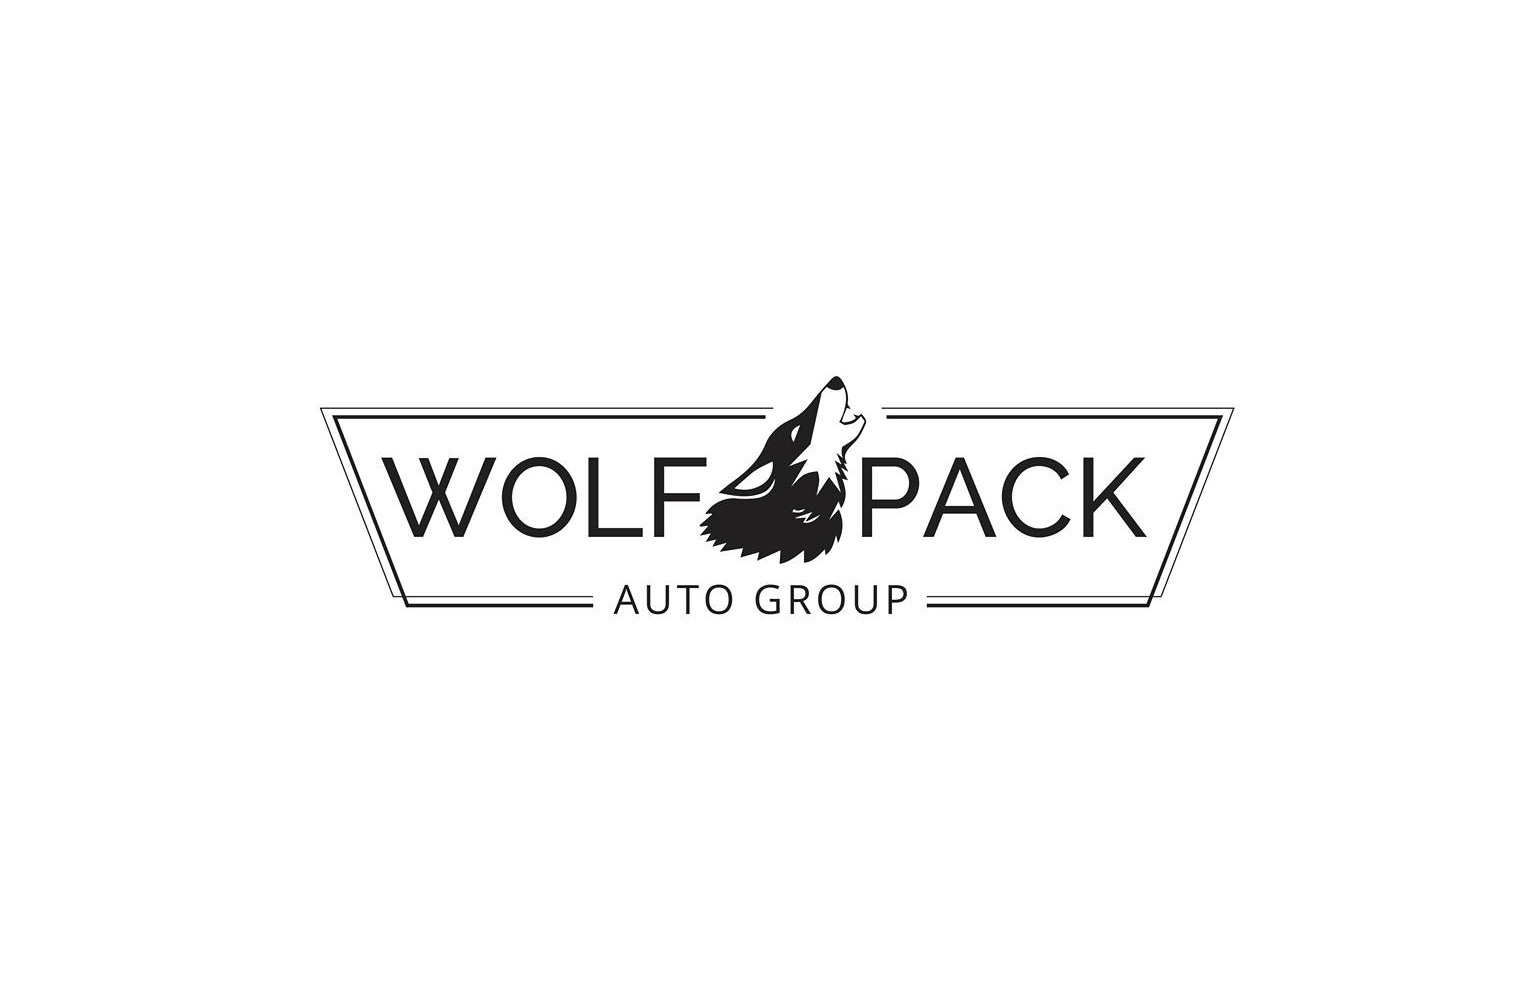 Wolfpack Auto Group